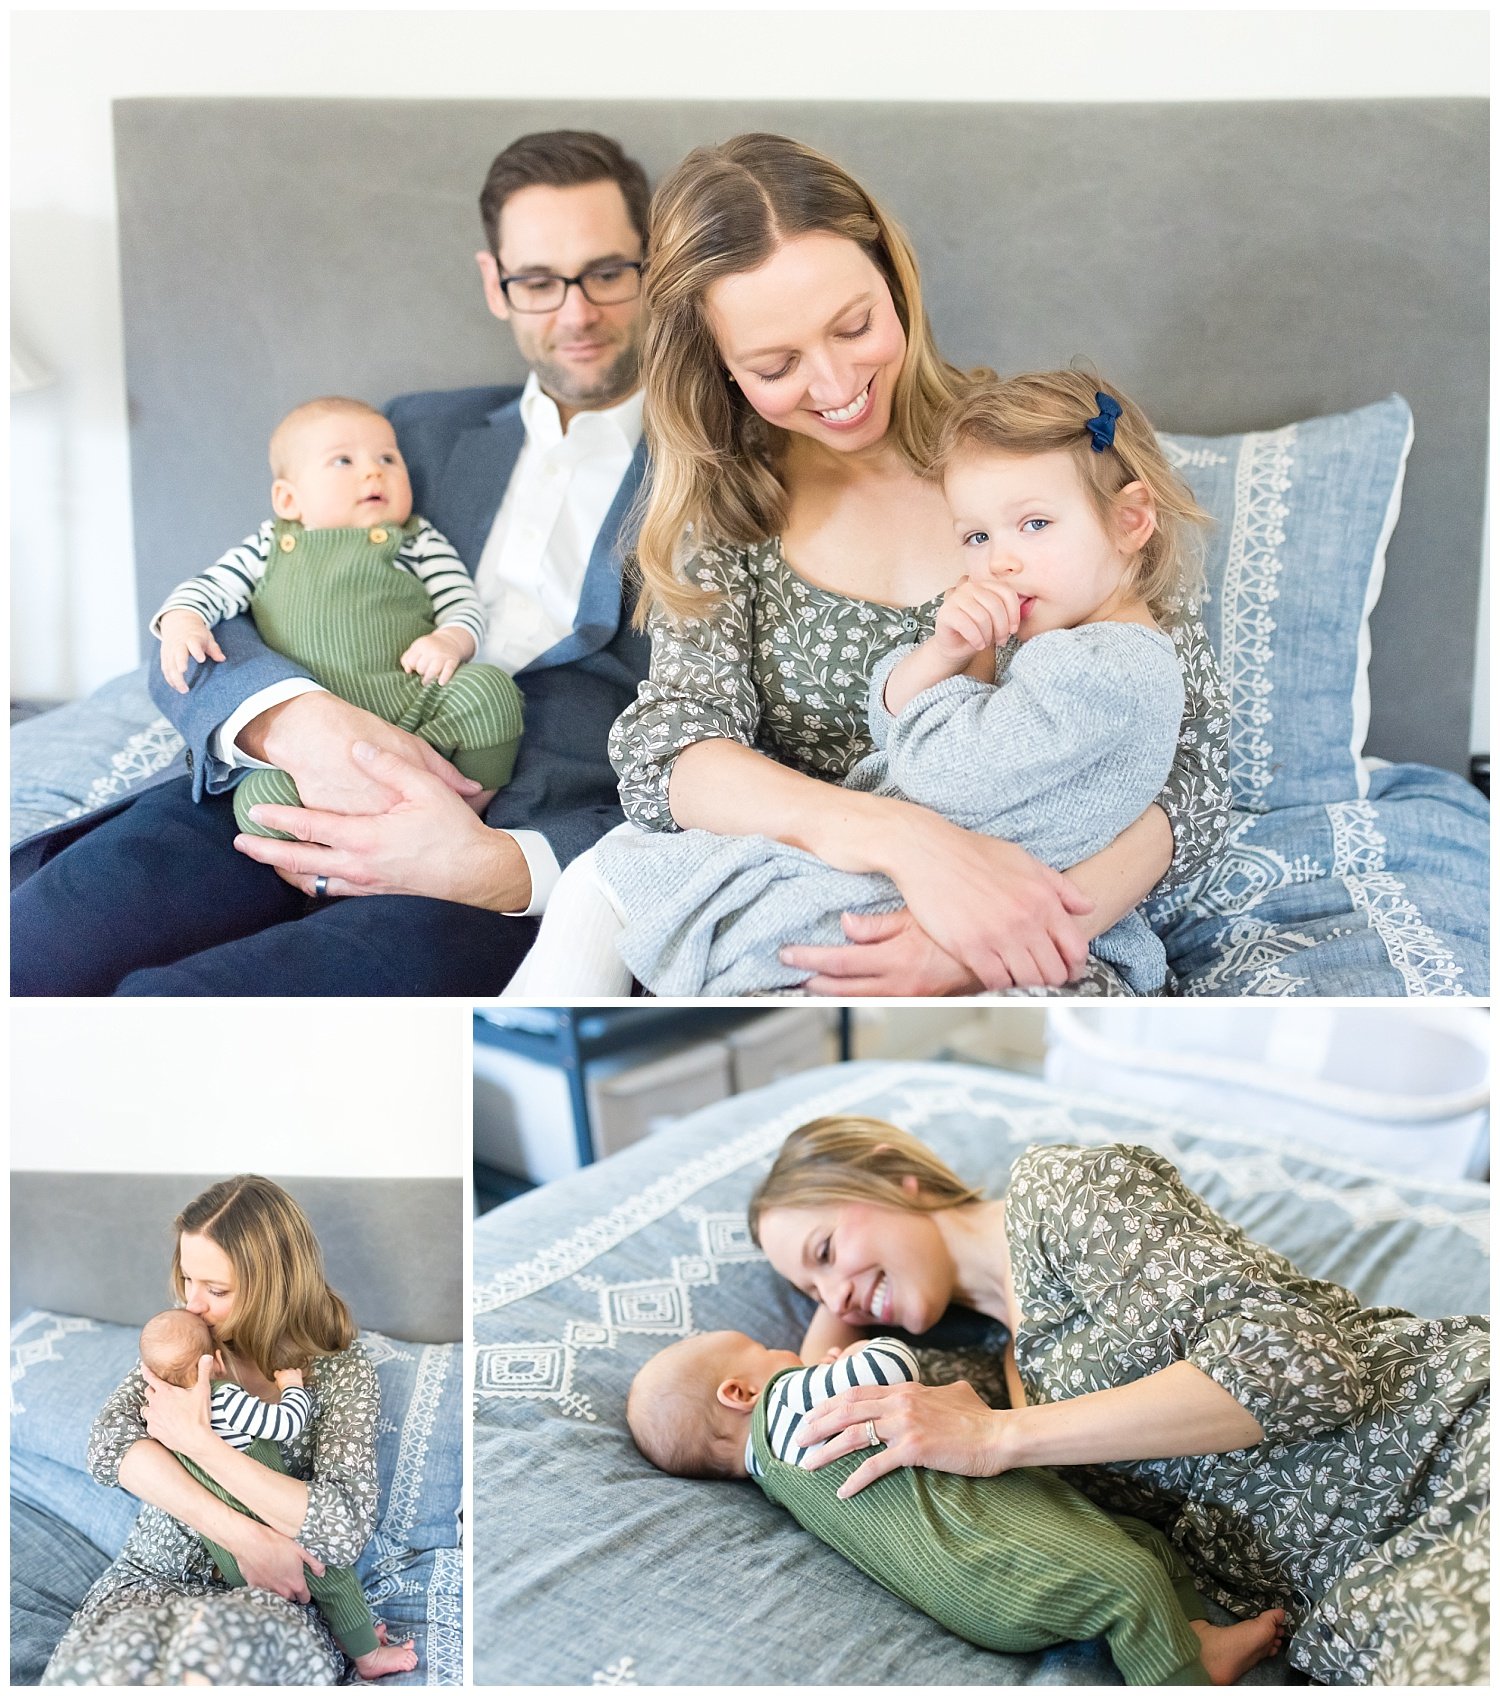 3-areas-to-take-photos-newborn-session-at-home (7).jpg